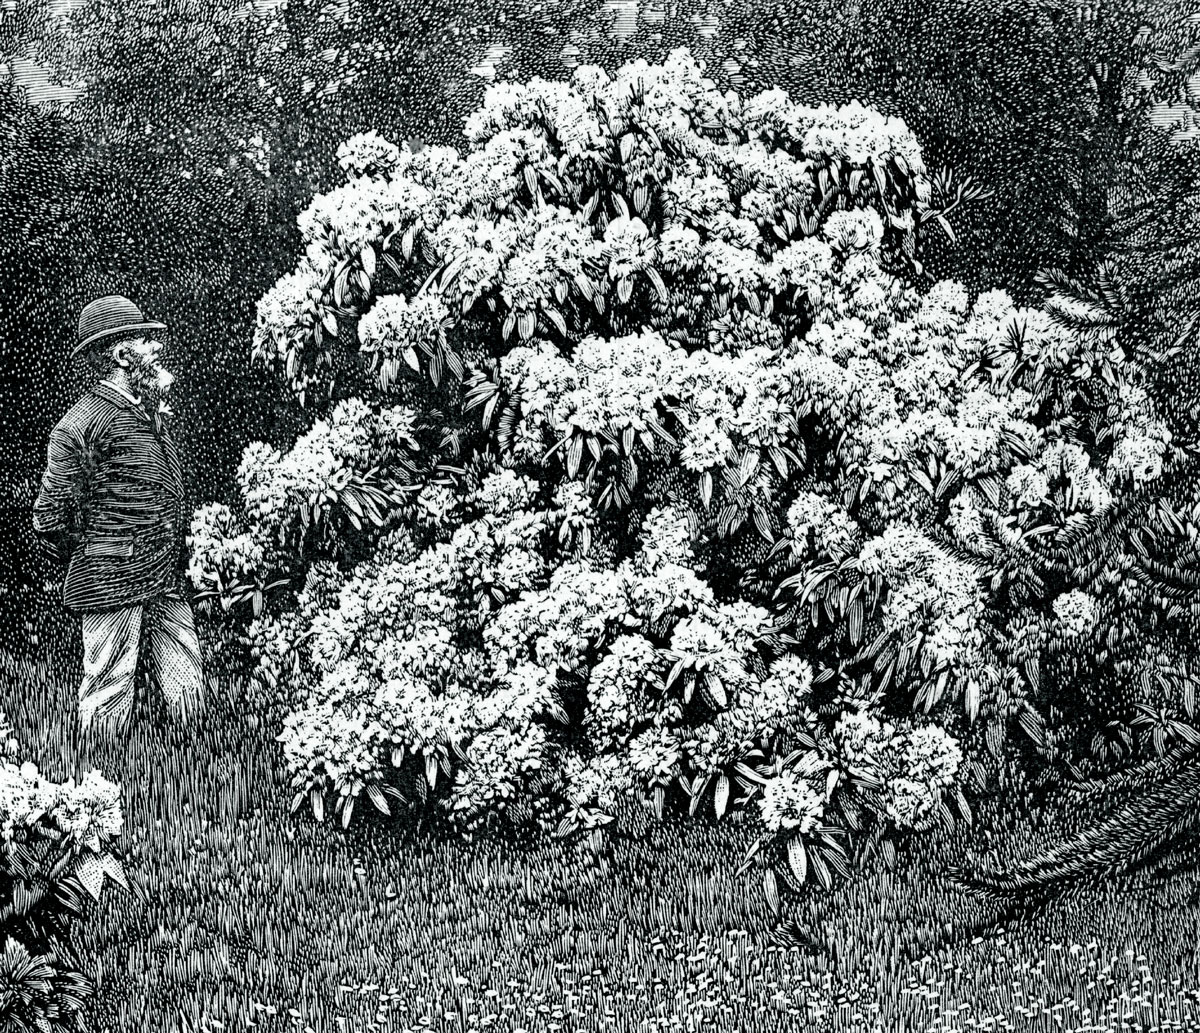 An 1899 illustration of rhododendrons in an English garden published in William Robinson's book, “The English Flower Garden.”